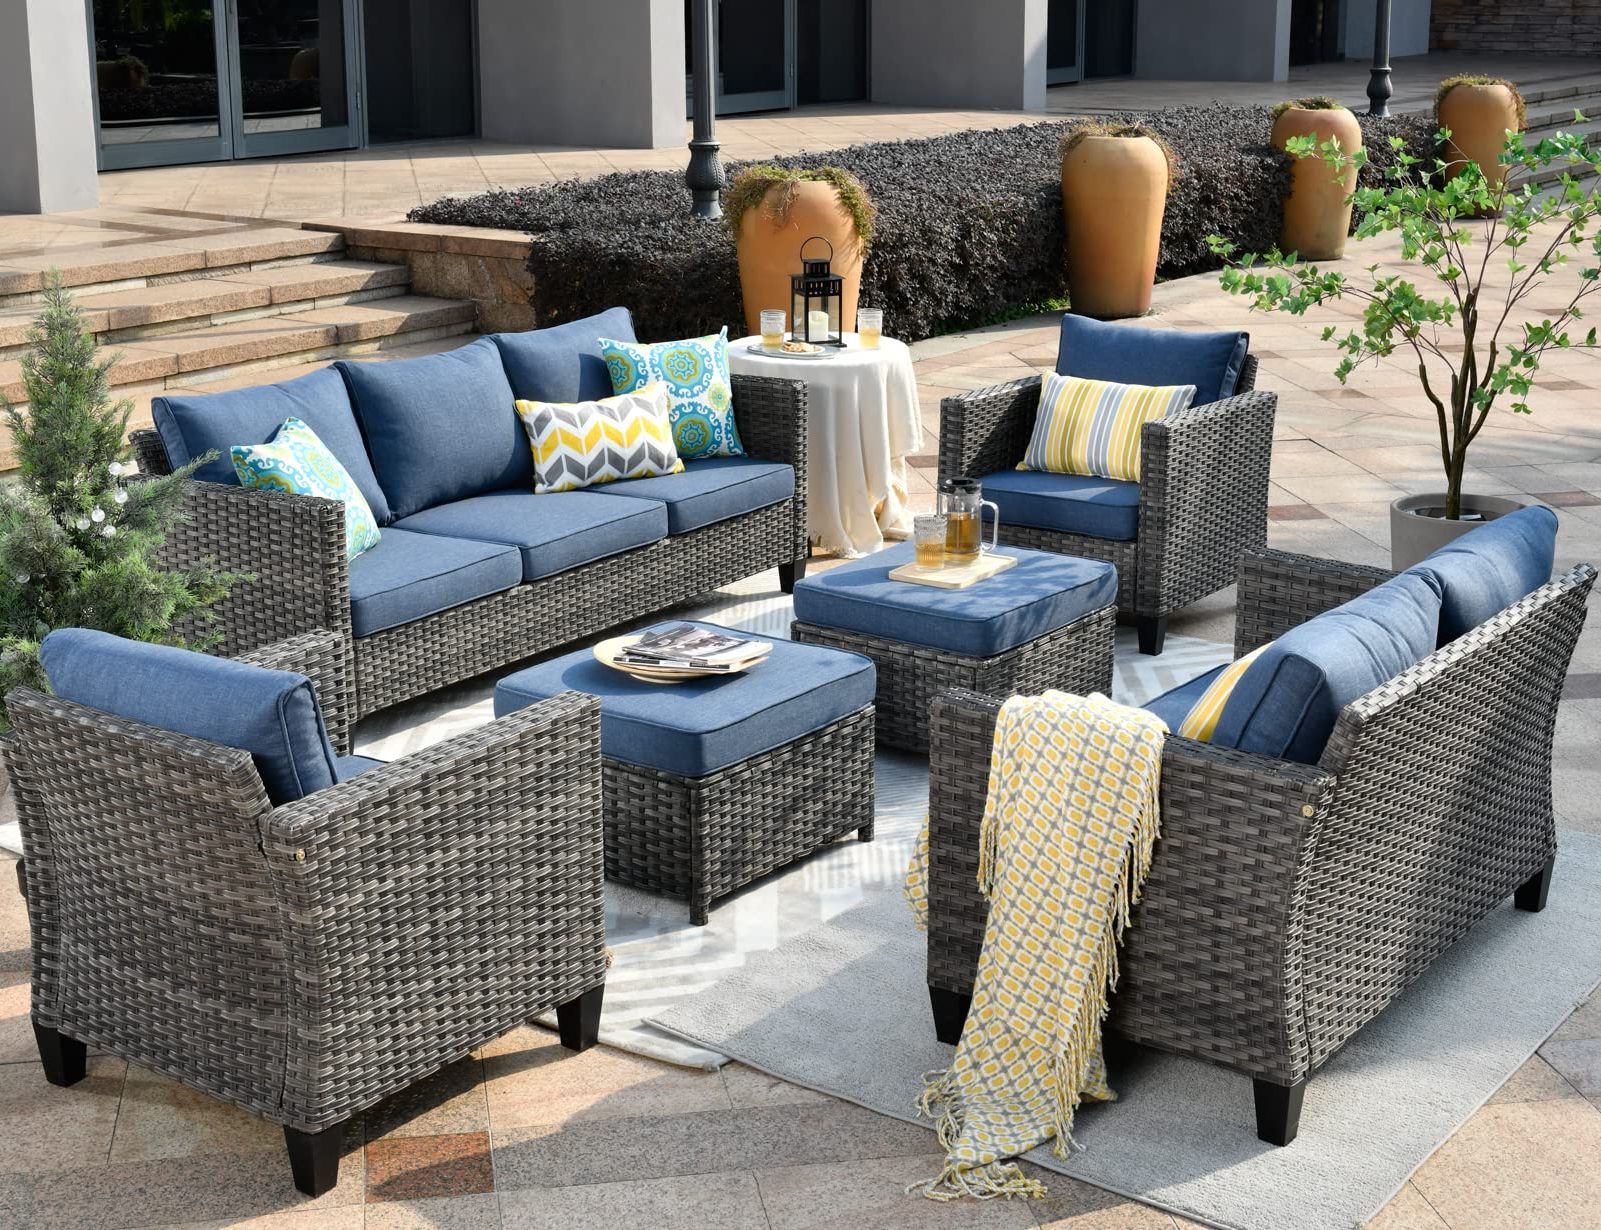 Most Recently Released Loveseat Chairs For Backyard With Regard To Amazon: Ovios Patio Furniture Set 6 Pcs Outdoor Sectional Sofa Set With Loveseat  Chairs Ottomans High Back Sofa All Weather Wicker Rattan Conversation Sets  For Yard Porch (denim Blue) : Patio, Lawn (View 3 of 15)